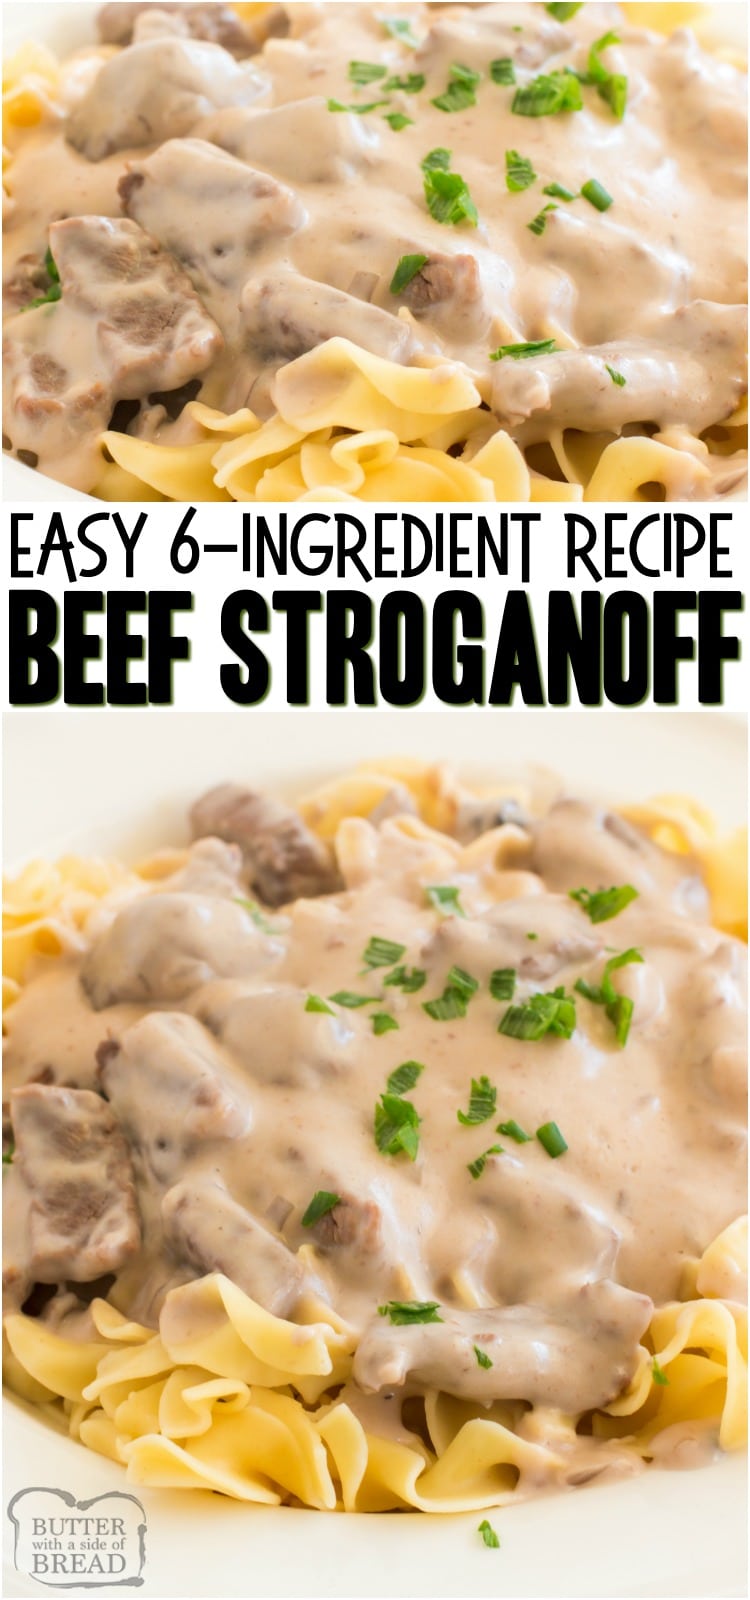 Easy Beef Stroganoff Recipe is a classic, creamy & delicious family dinner recipe.  With just a few simple ingredients, you too can make this mouth watering easy Beef Stroganoff dinner in no time at all.